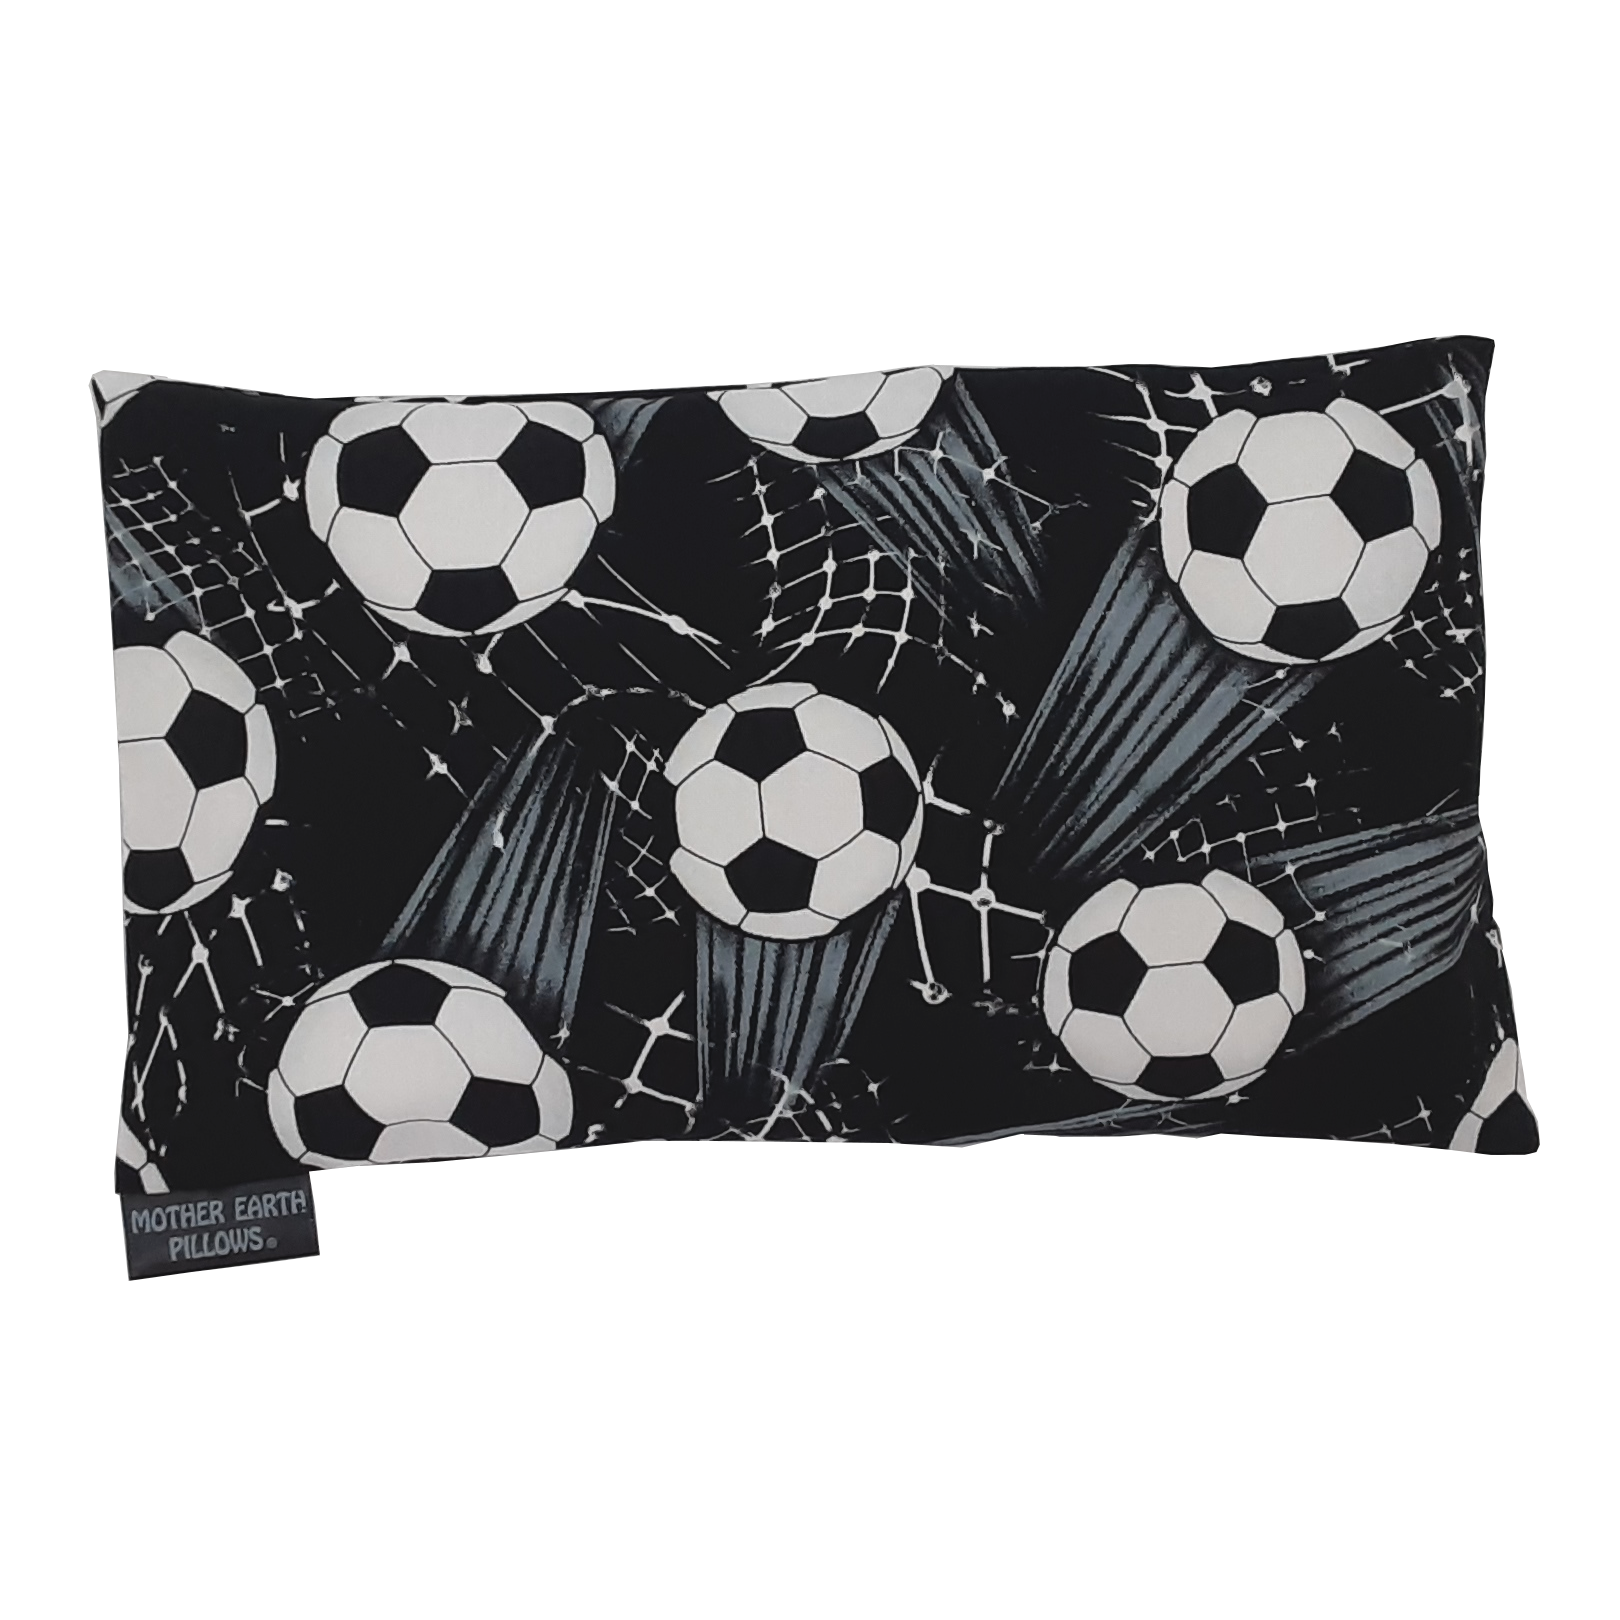 https://www.motherearthpillows.com/wp-content/uploads/2022/02/Sm-flax-soccer-no-bg.png